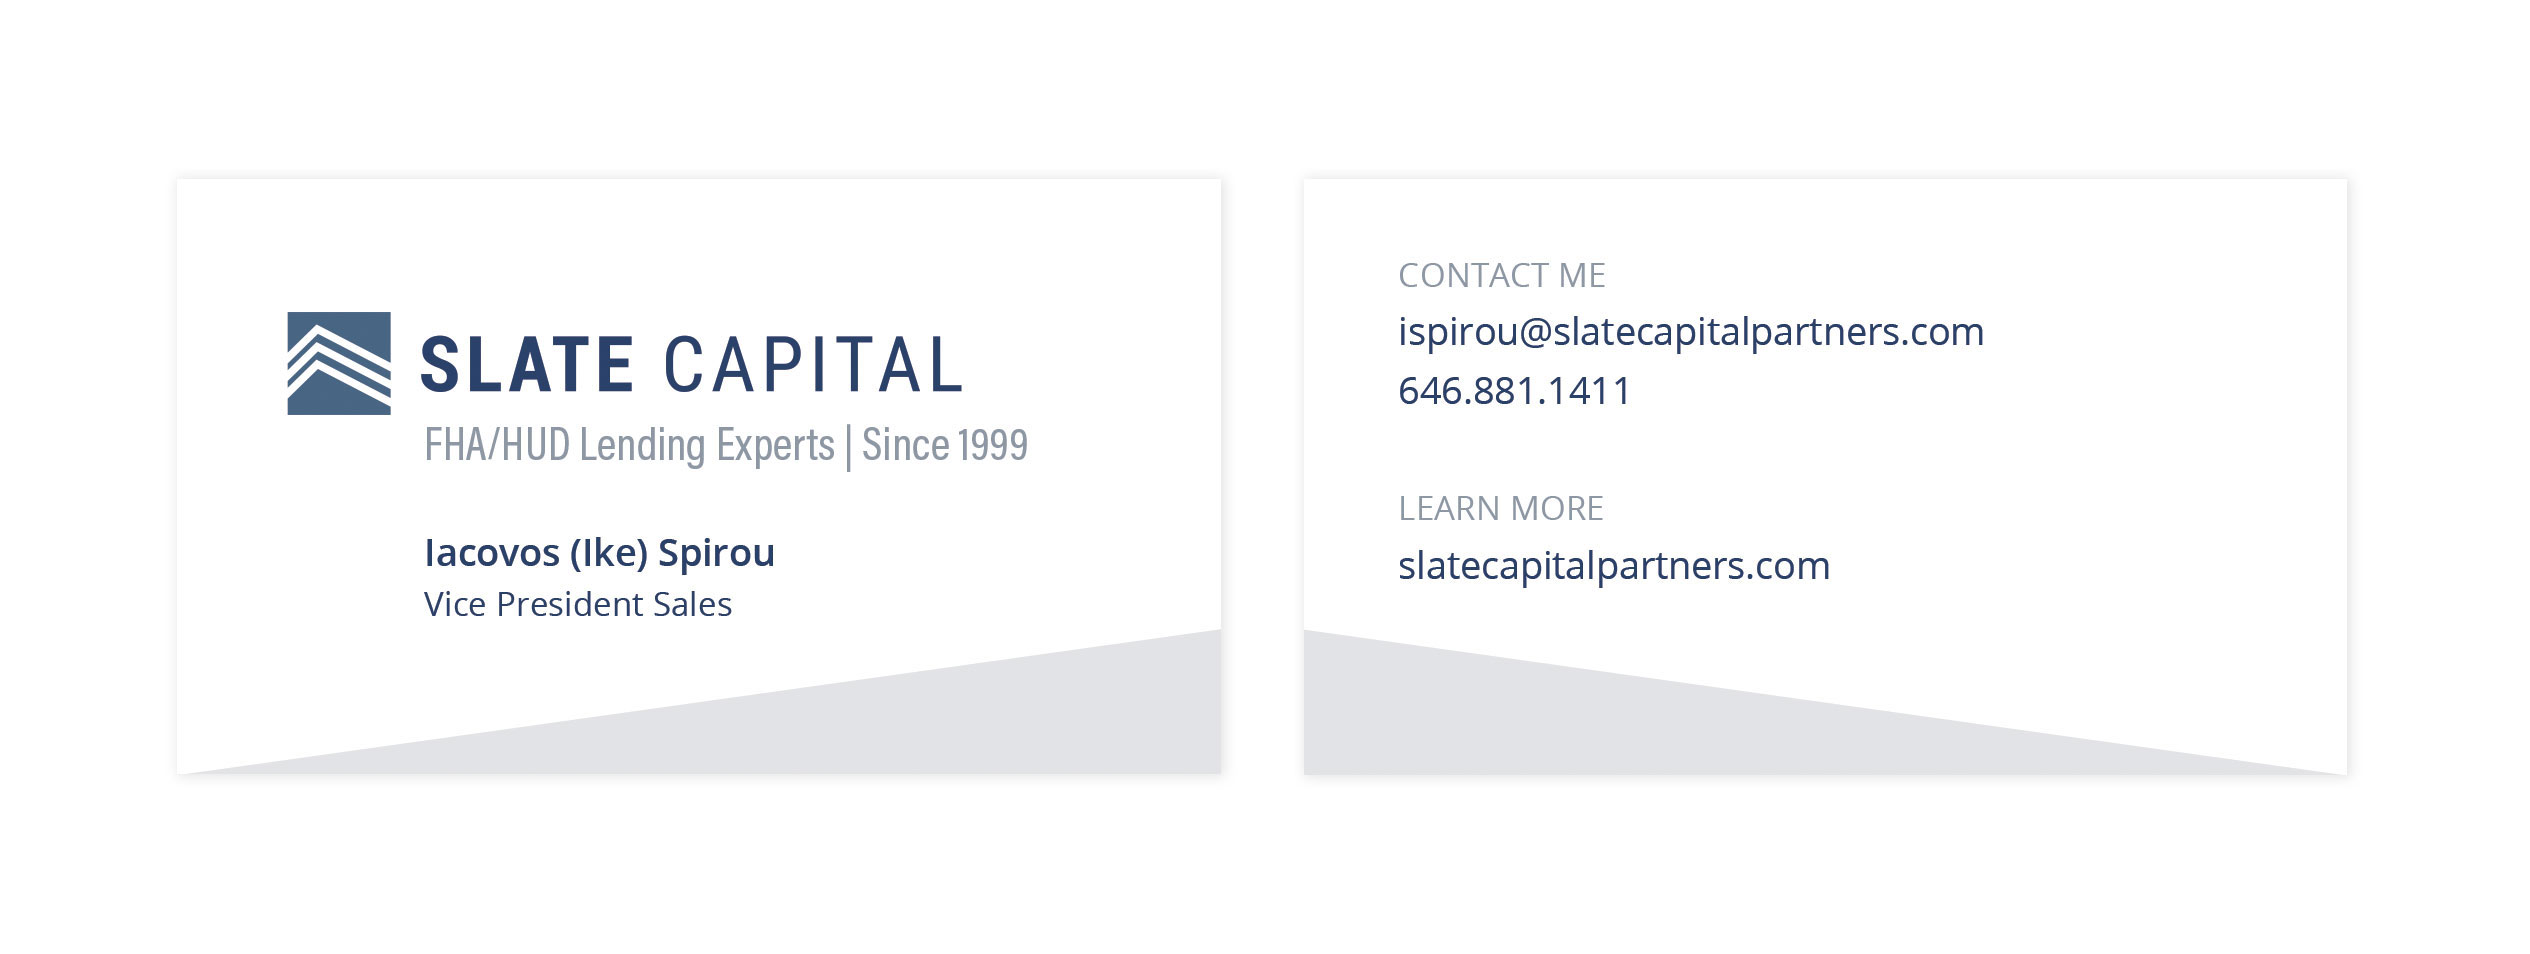 Slate Capital business cards front and back